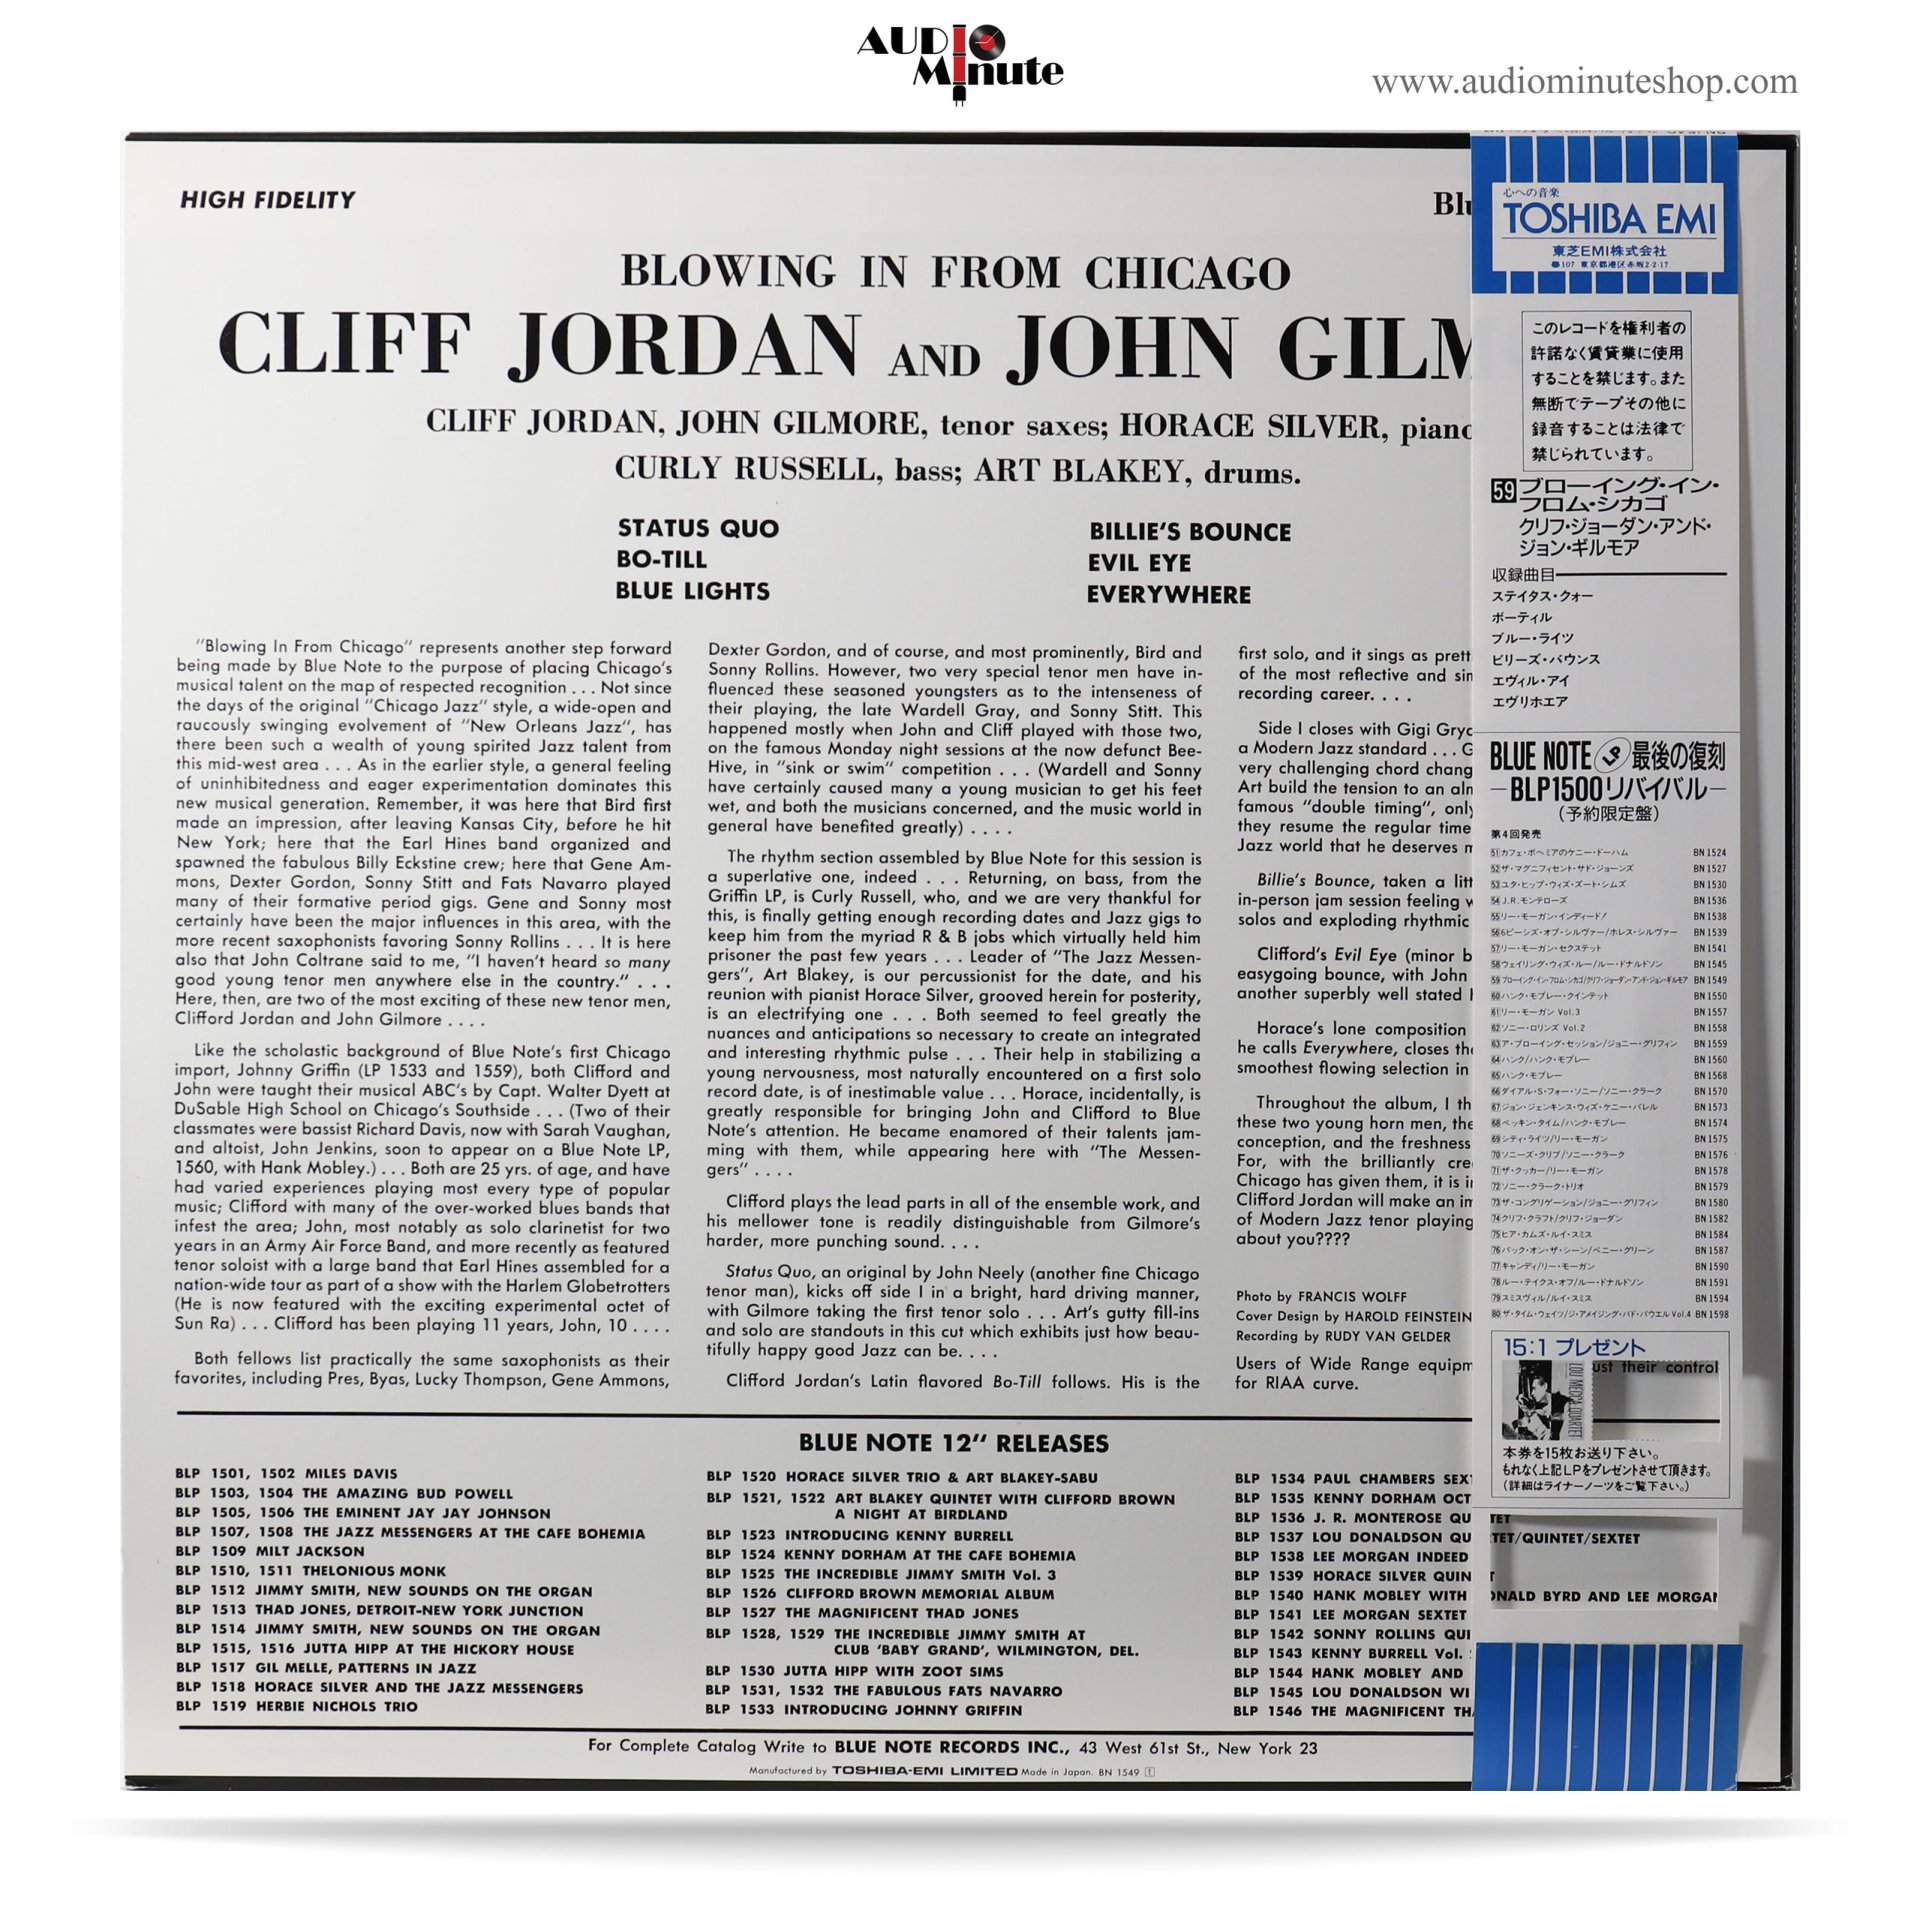 Chicago　Blowing　John　Cliff　–　From　In　audiominuteshop　Jordan,　Gilmore